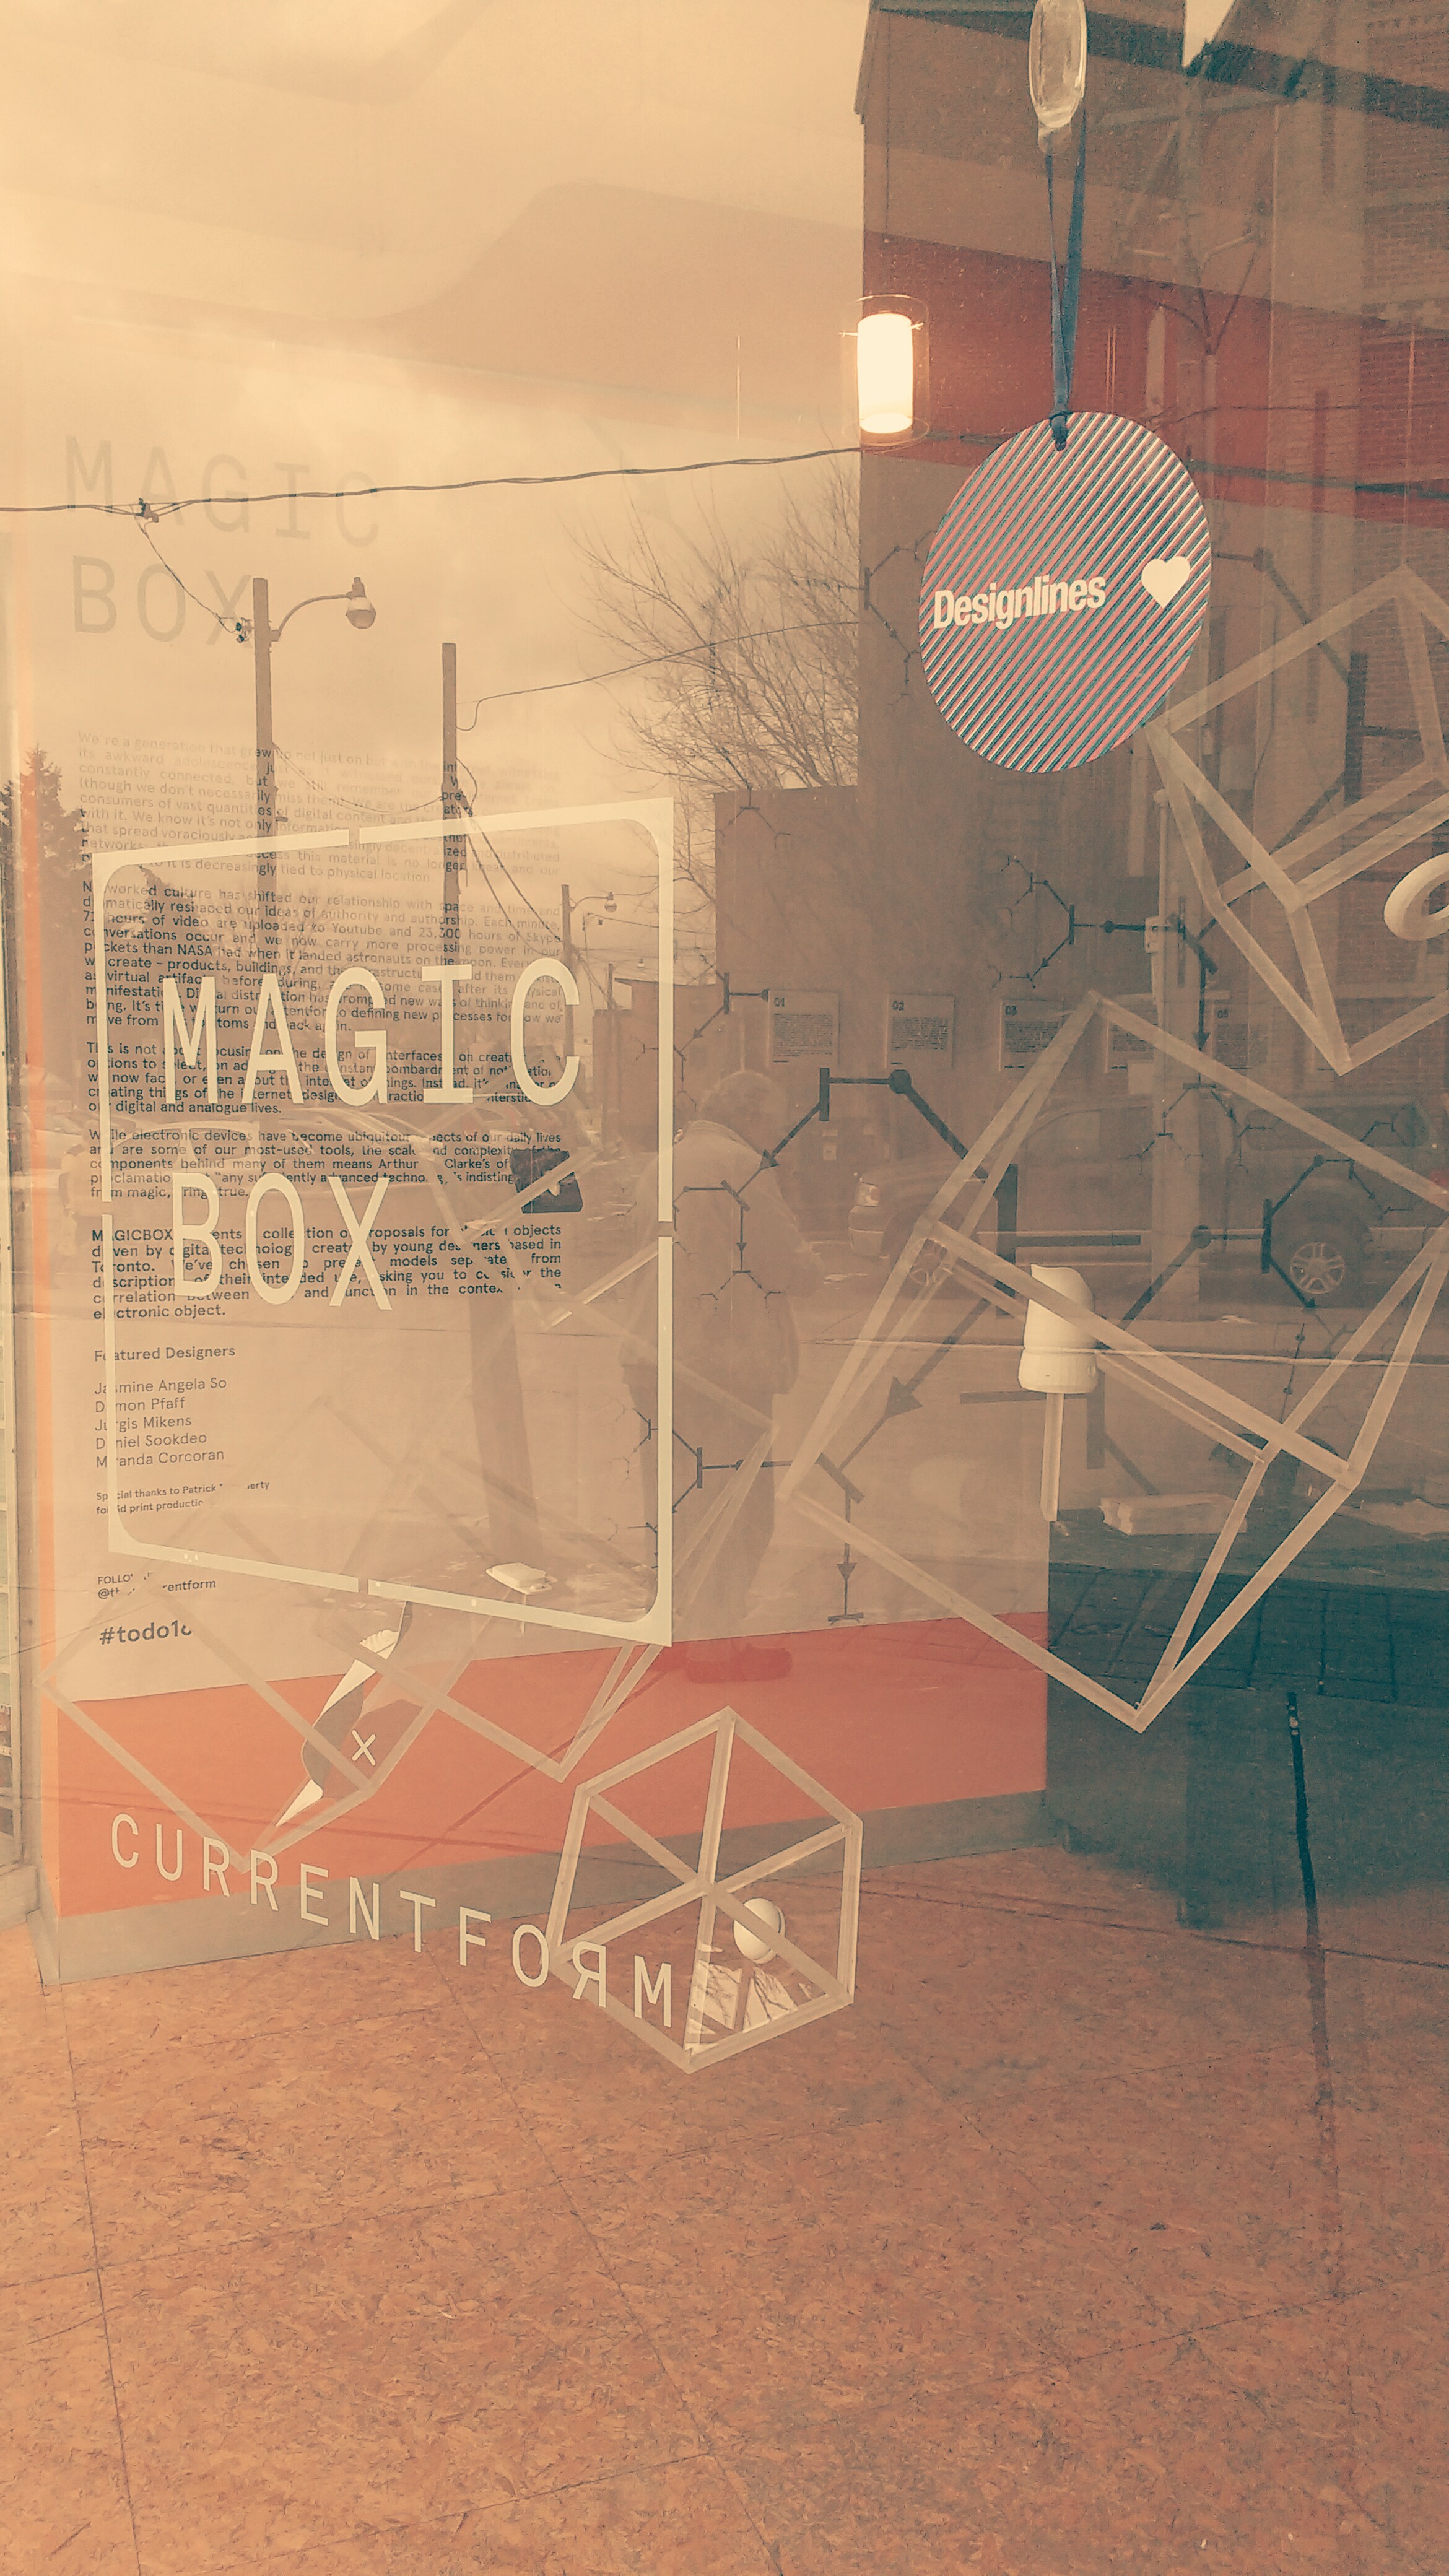 MAGICBOX Installation up this week for Toronto Offsite Design Fesitval 2016